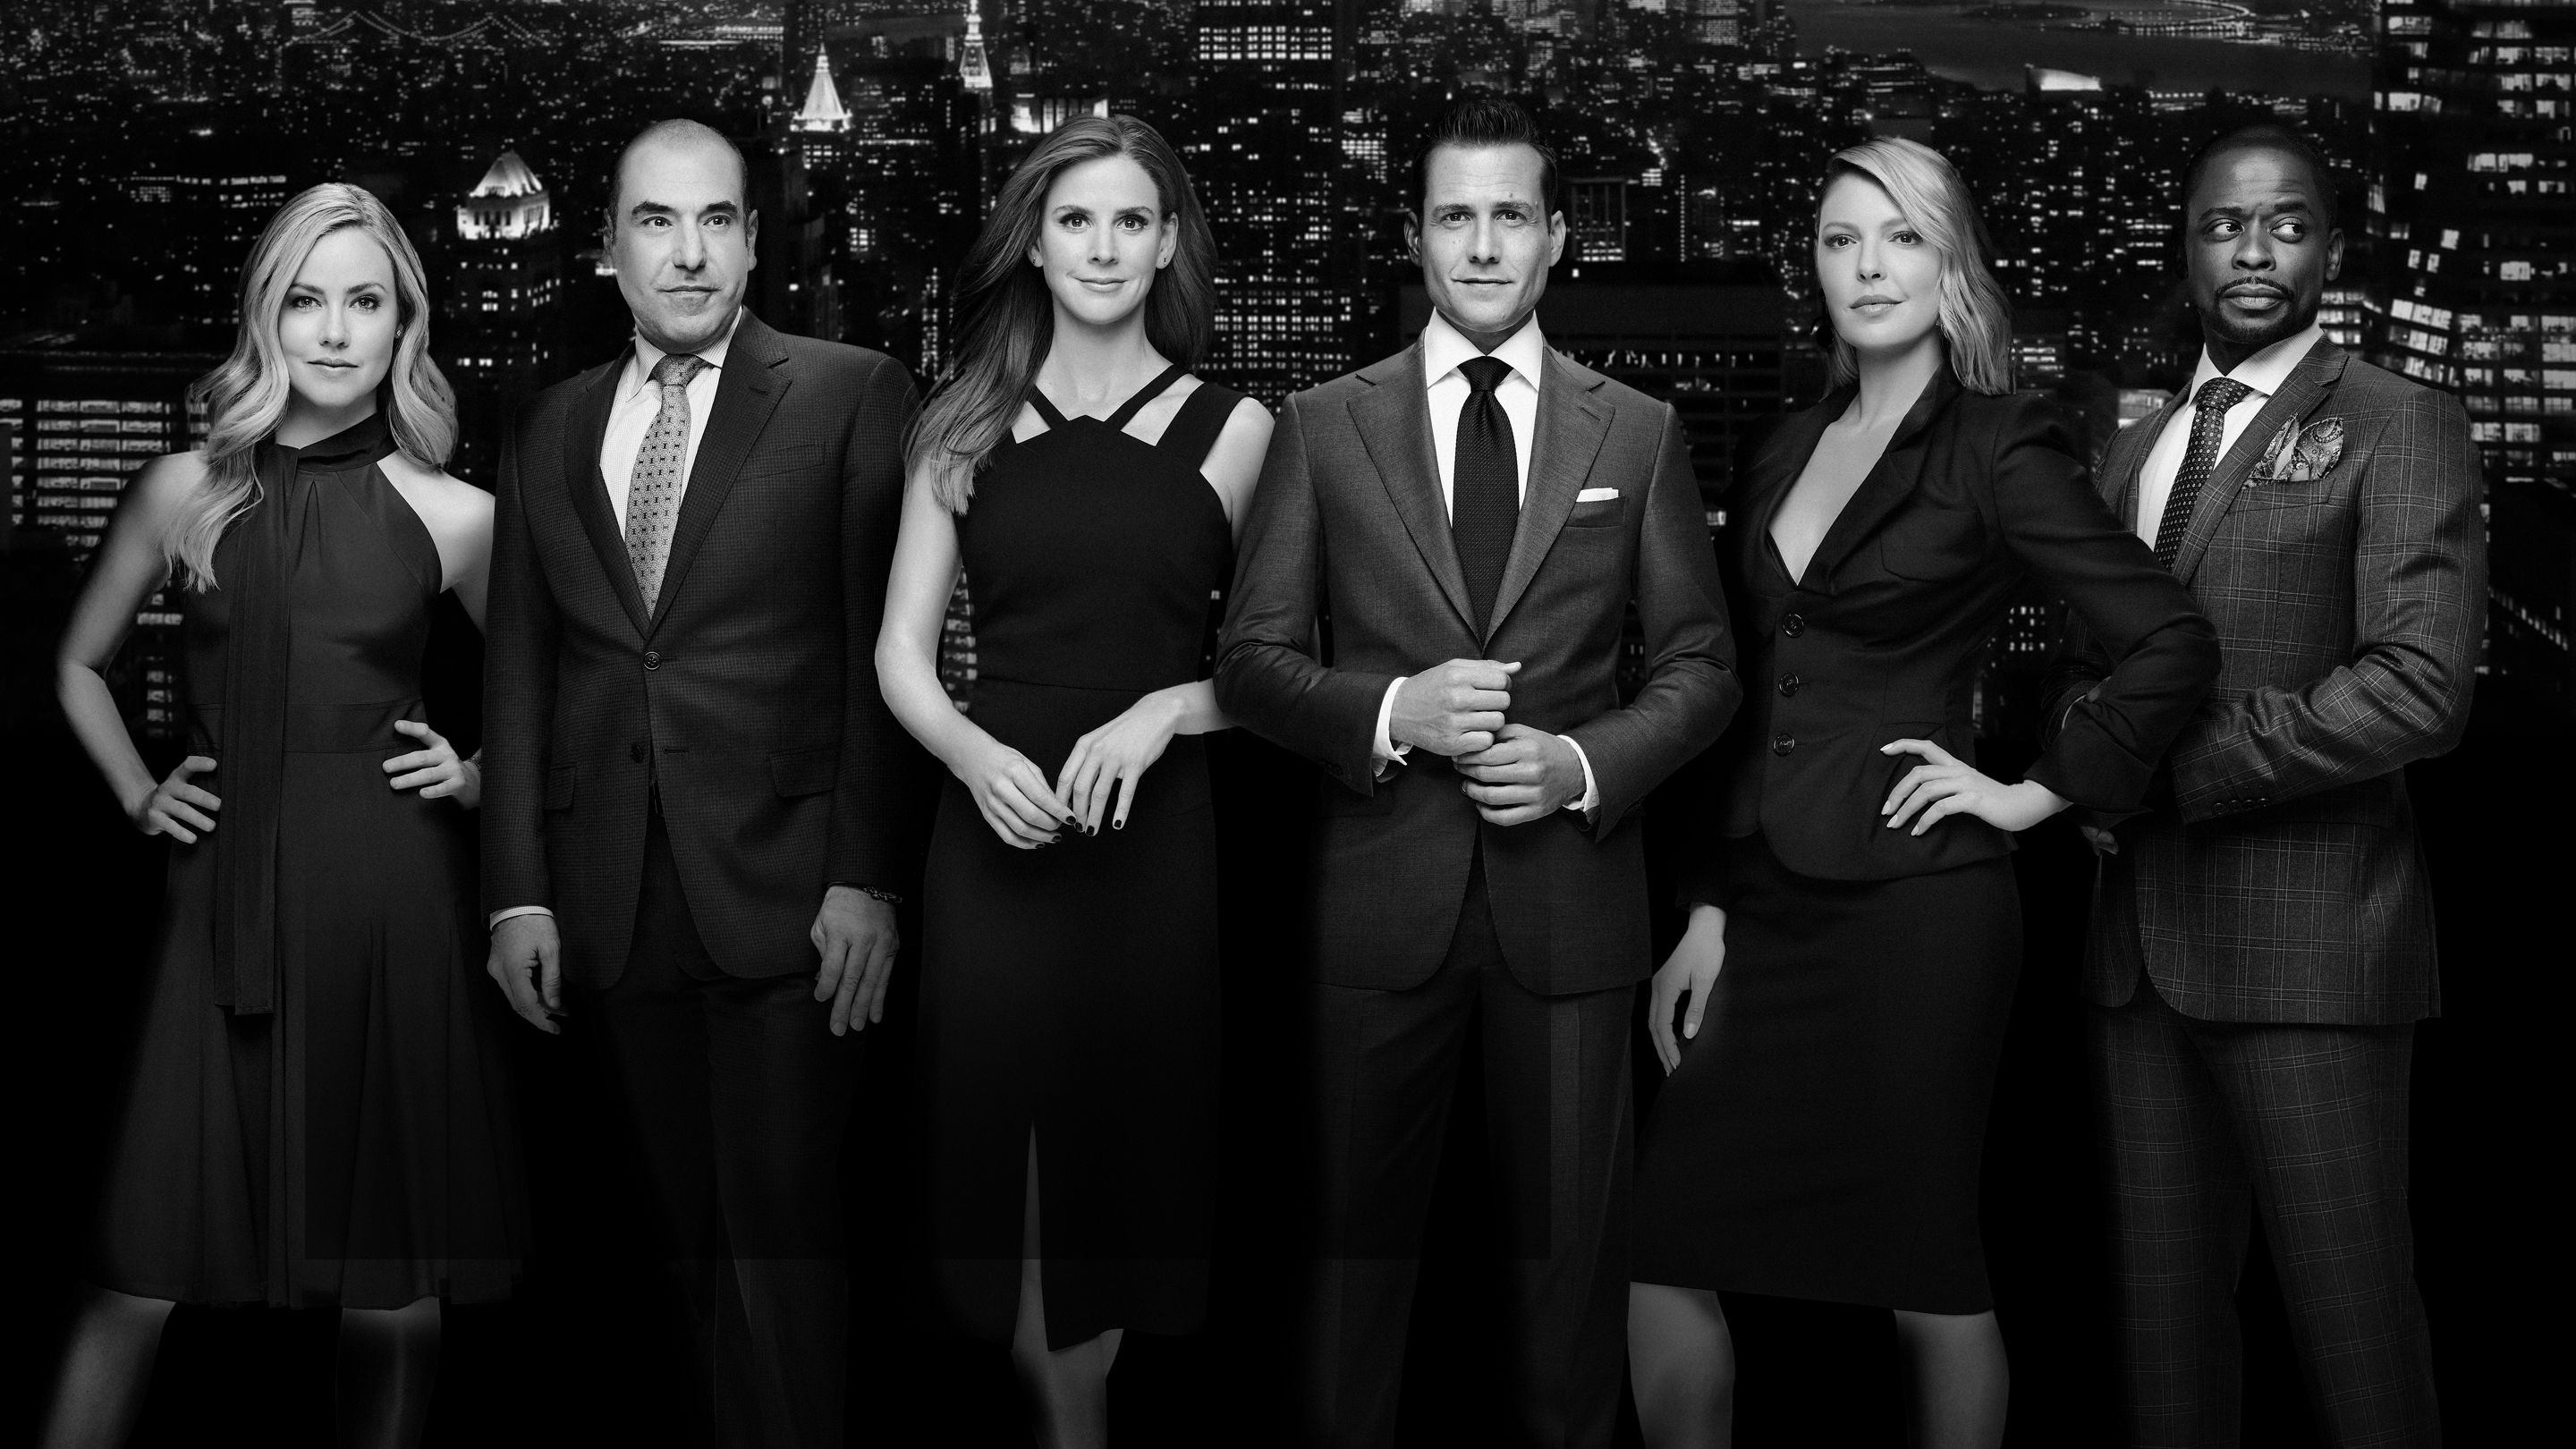 9 best moments from Suits, the TV series that had us riveted for 9 seasons